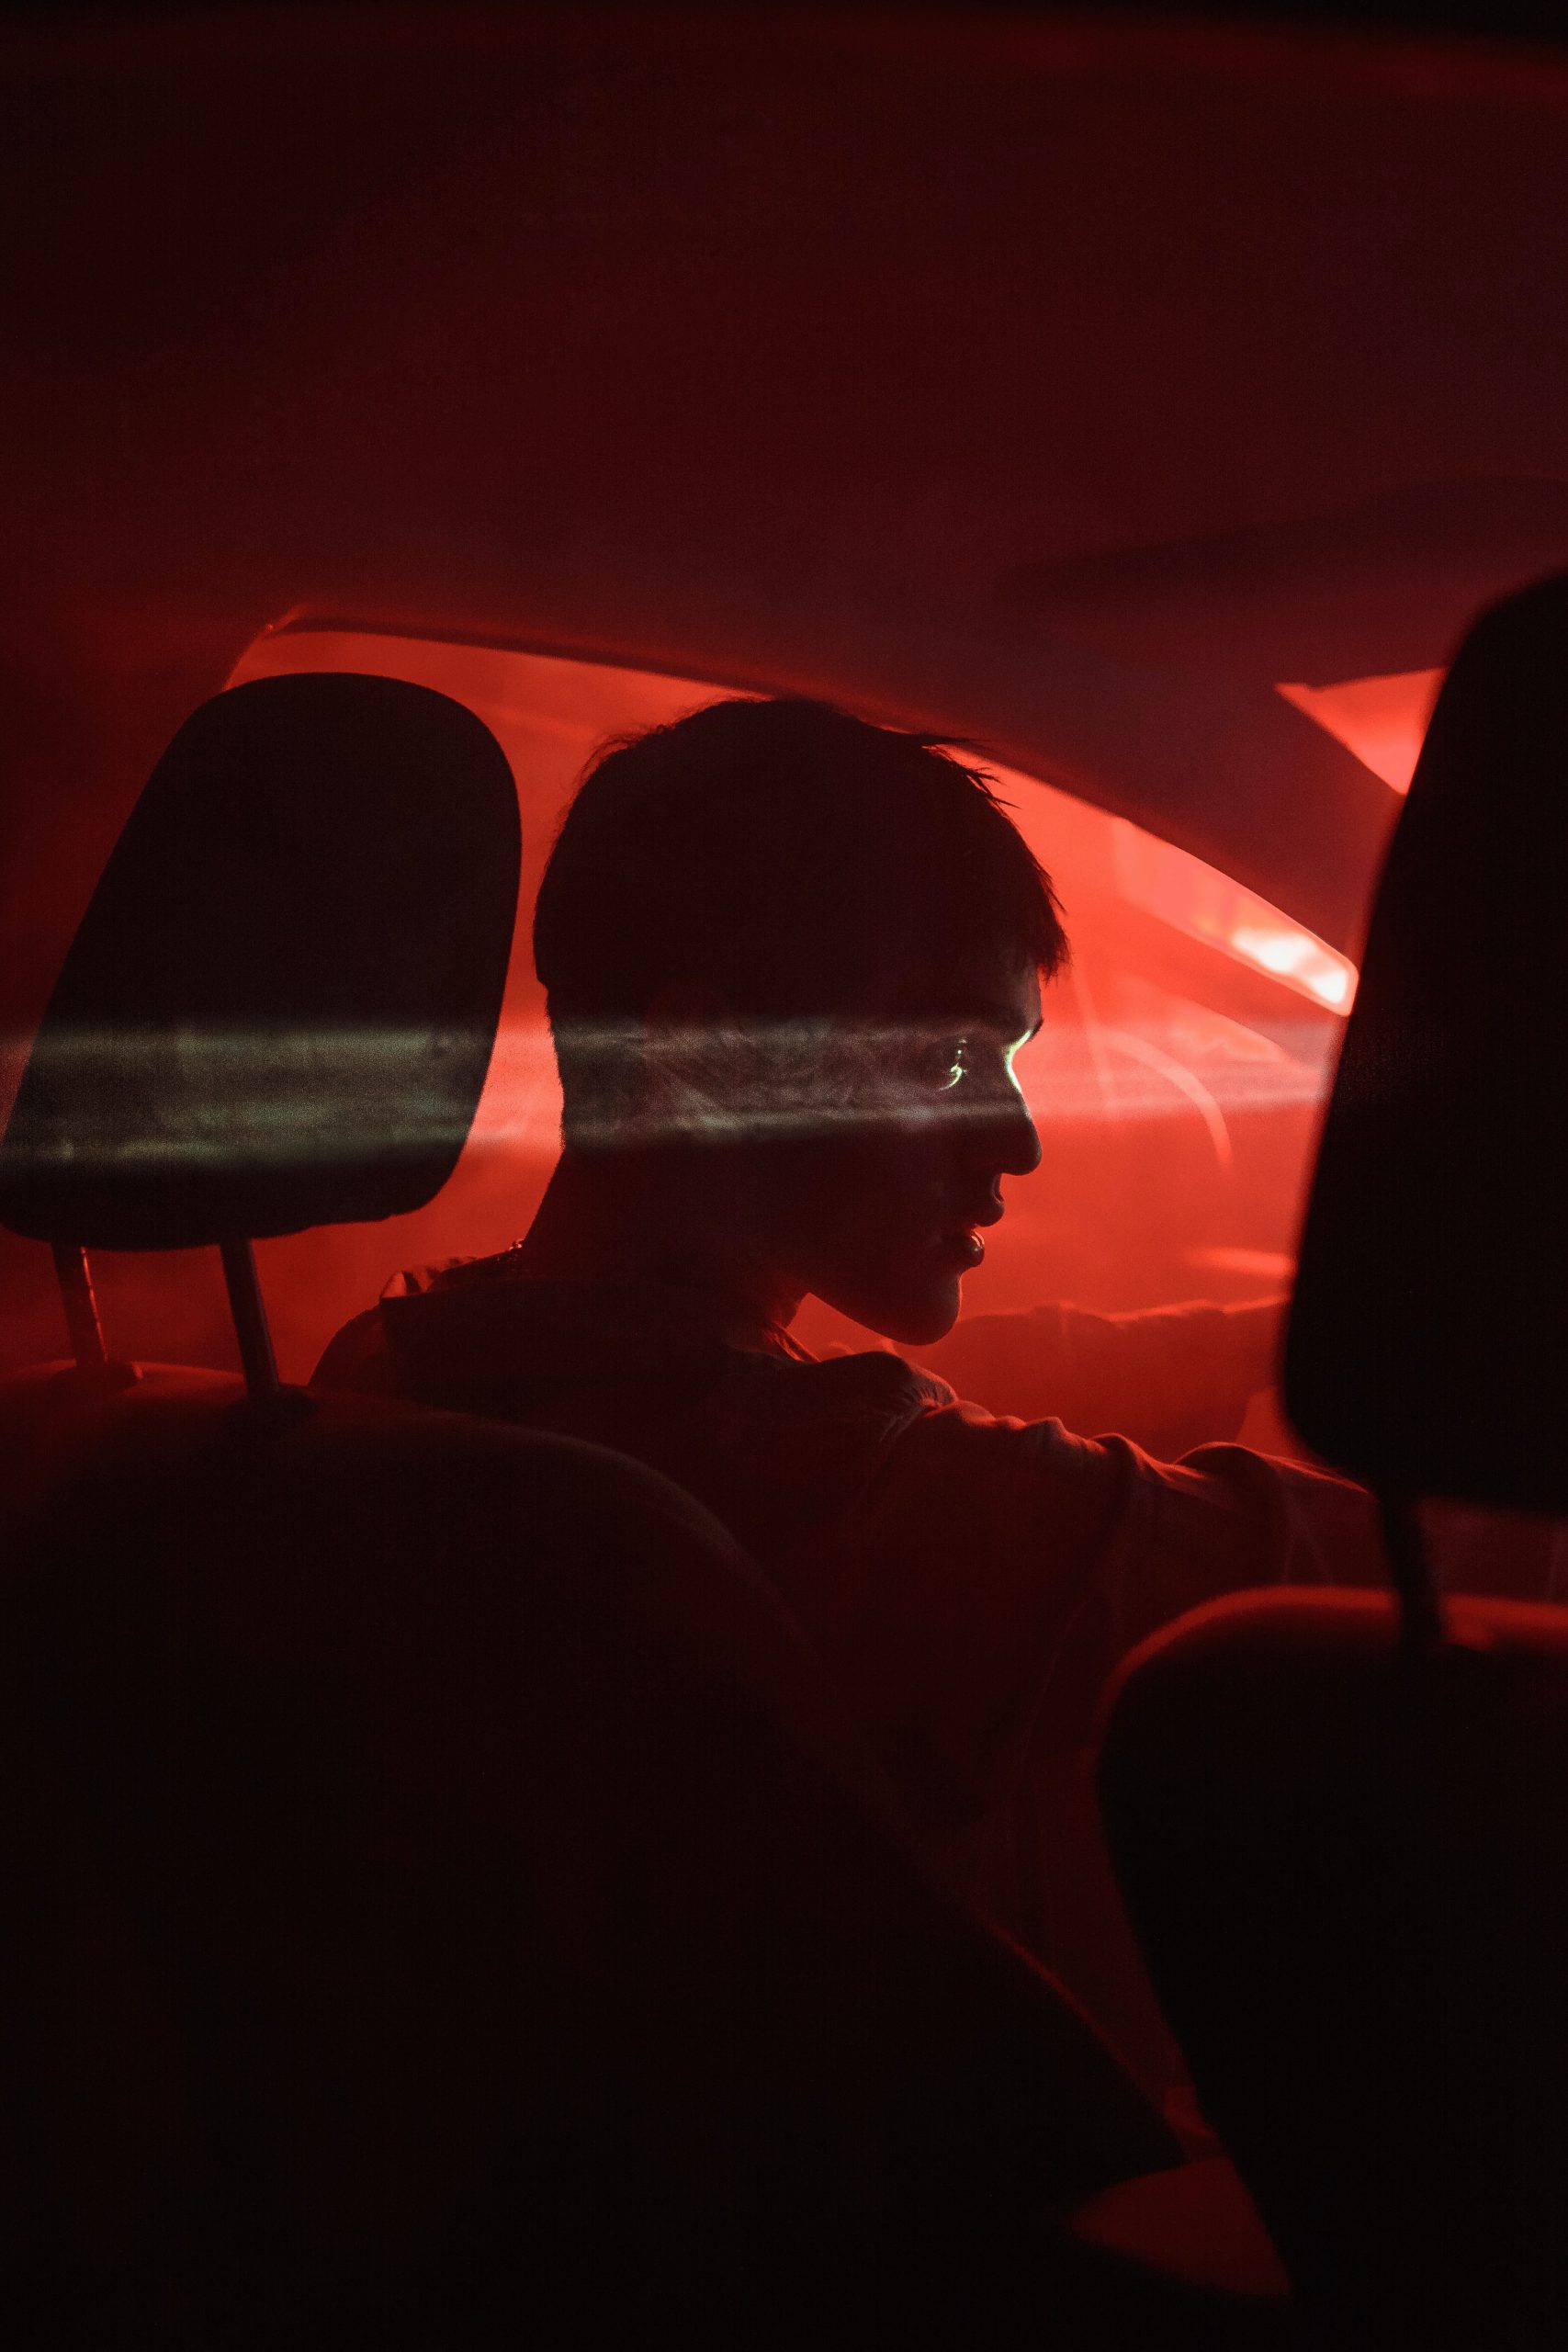 A young man in neon light demonstrating driving under drug influence